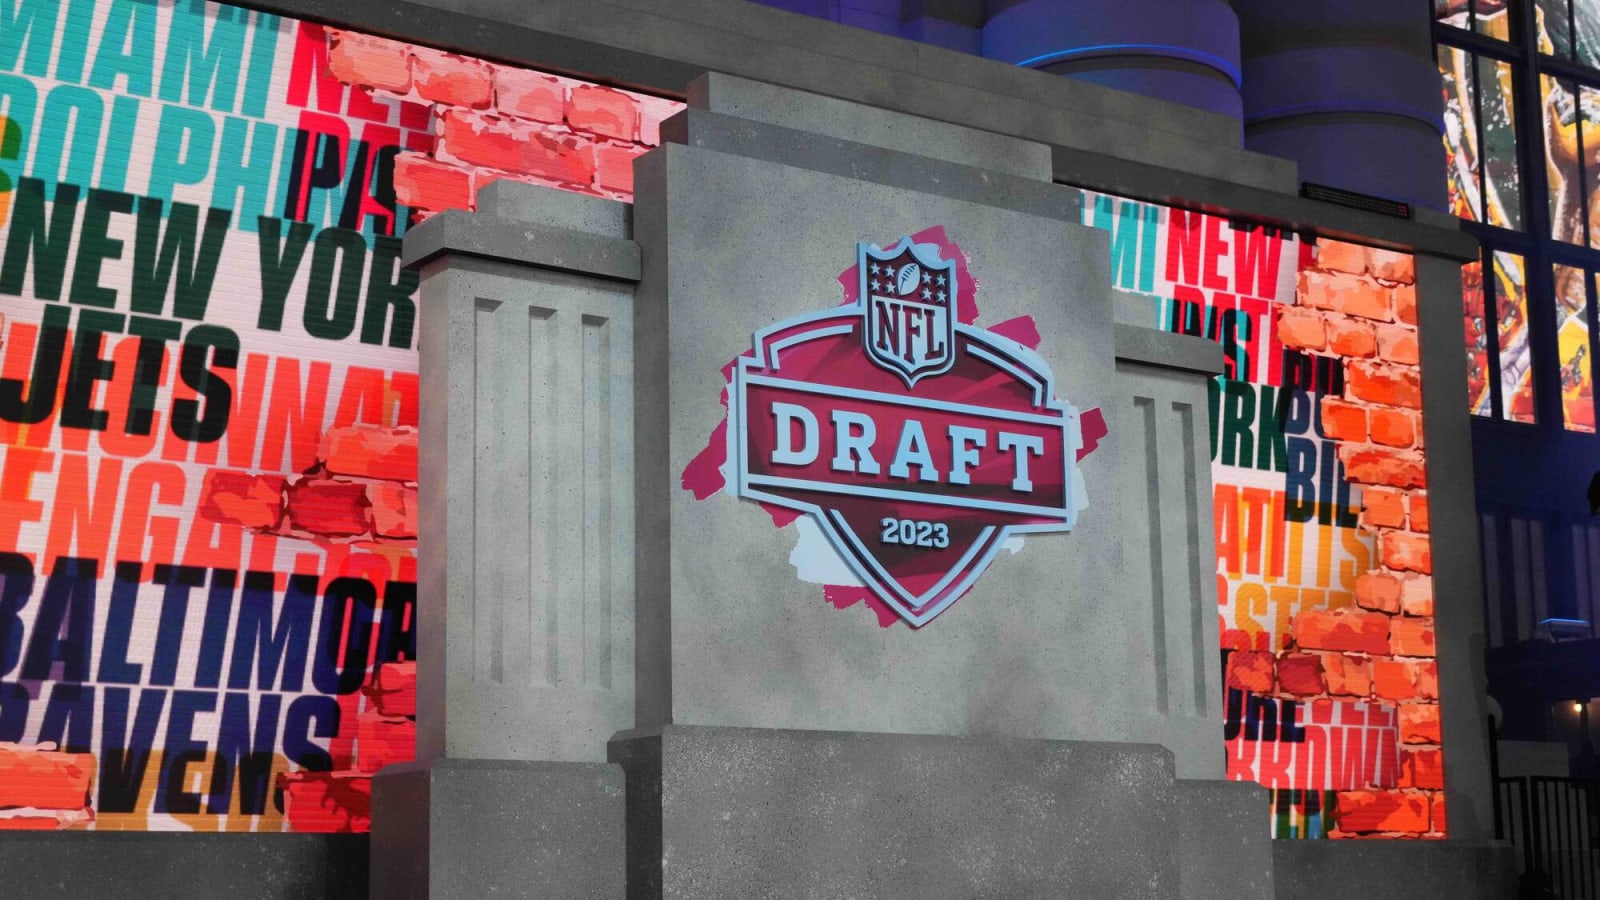 Twitter reacts to Packers being named host of 2025 NFL Draft